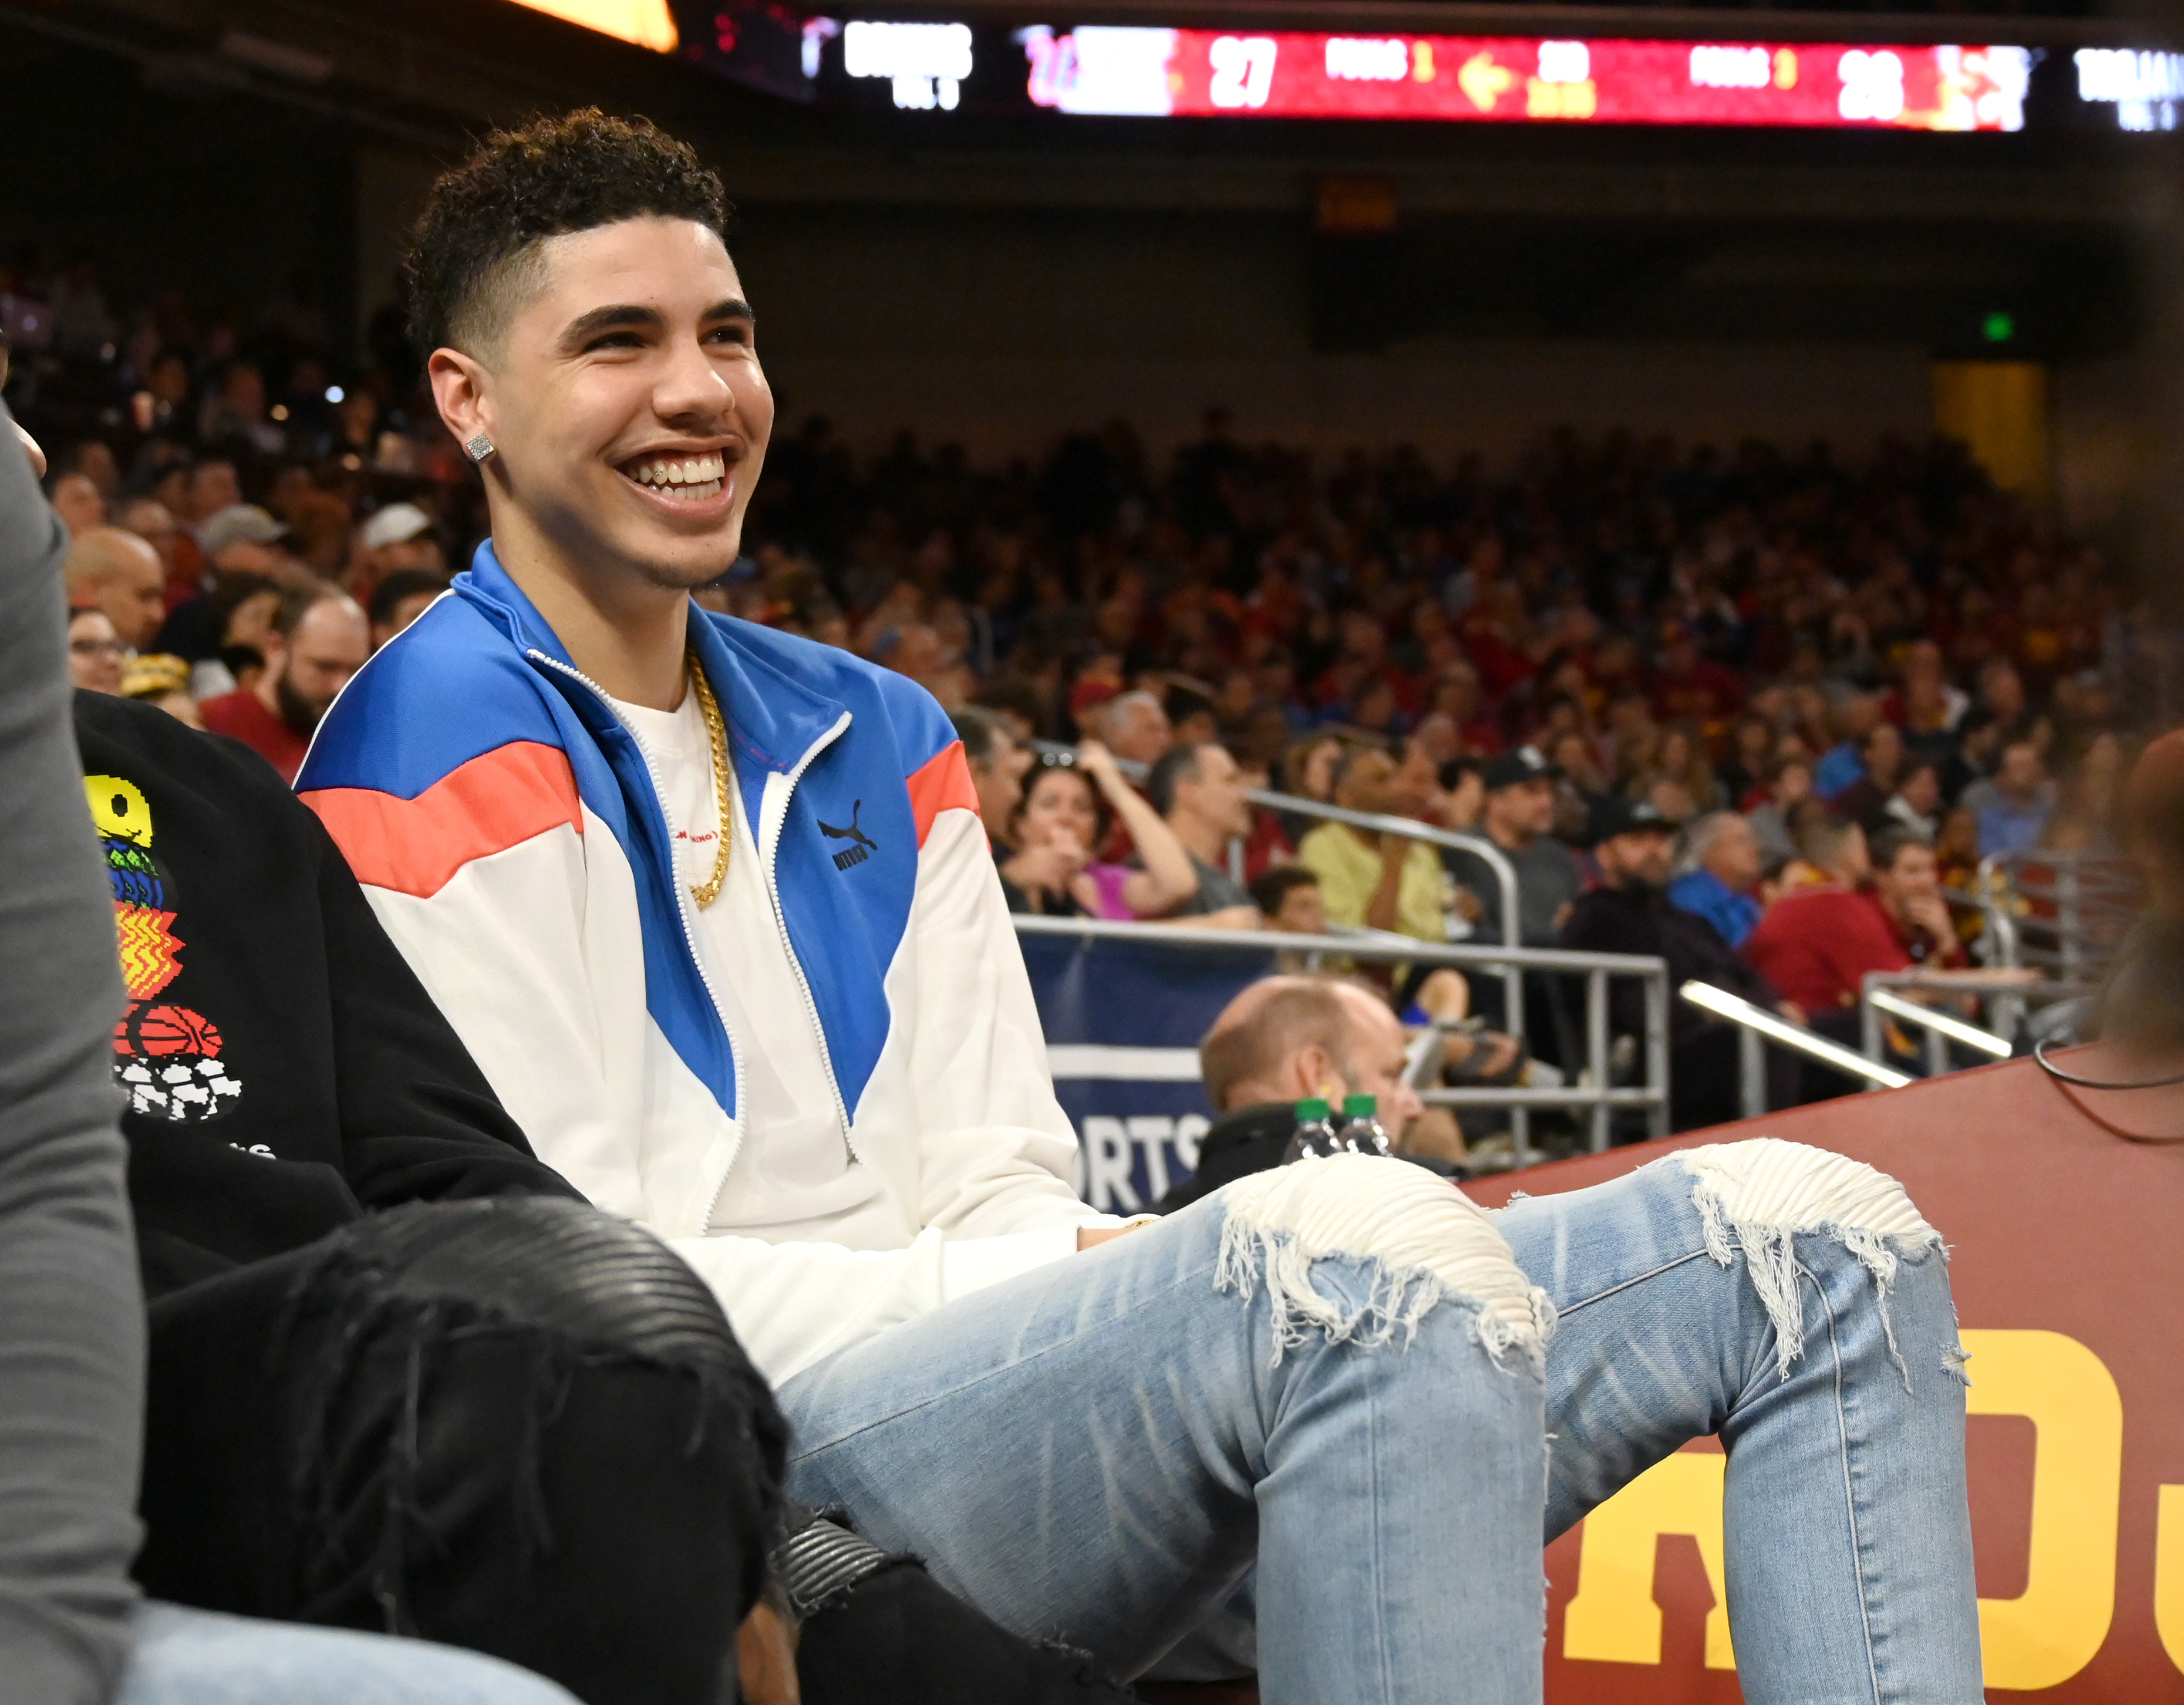 Professional basketball player LaMelo Ball, right, attends the game between the USC Trojans and the UCLA Bruins at Galen Center on March 7, 2020 in Los Angeles, California.